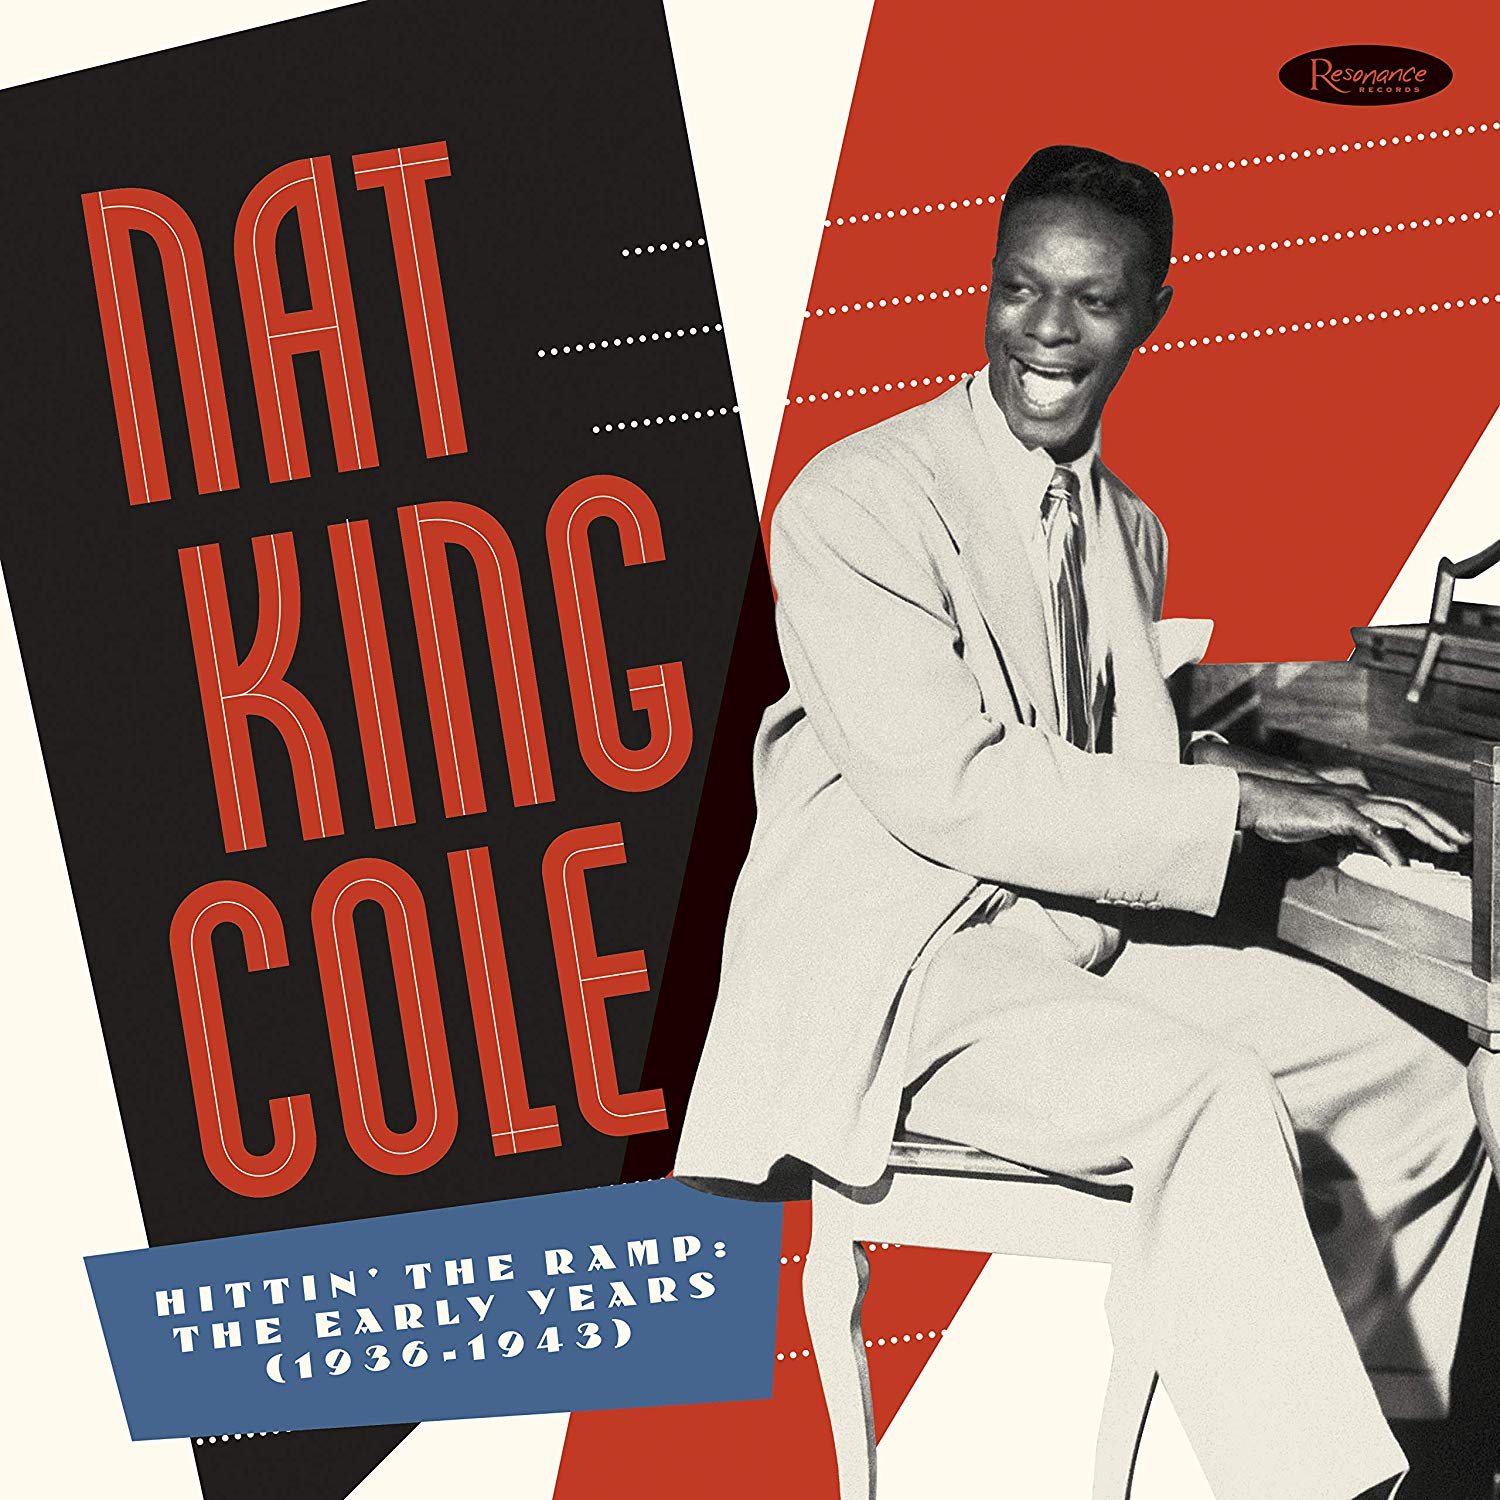 Nat King Cole: Hittin’ the Ramp: The Early Years (1936-1943)